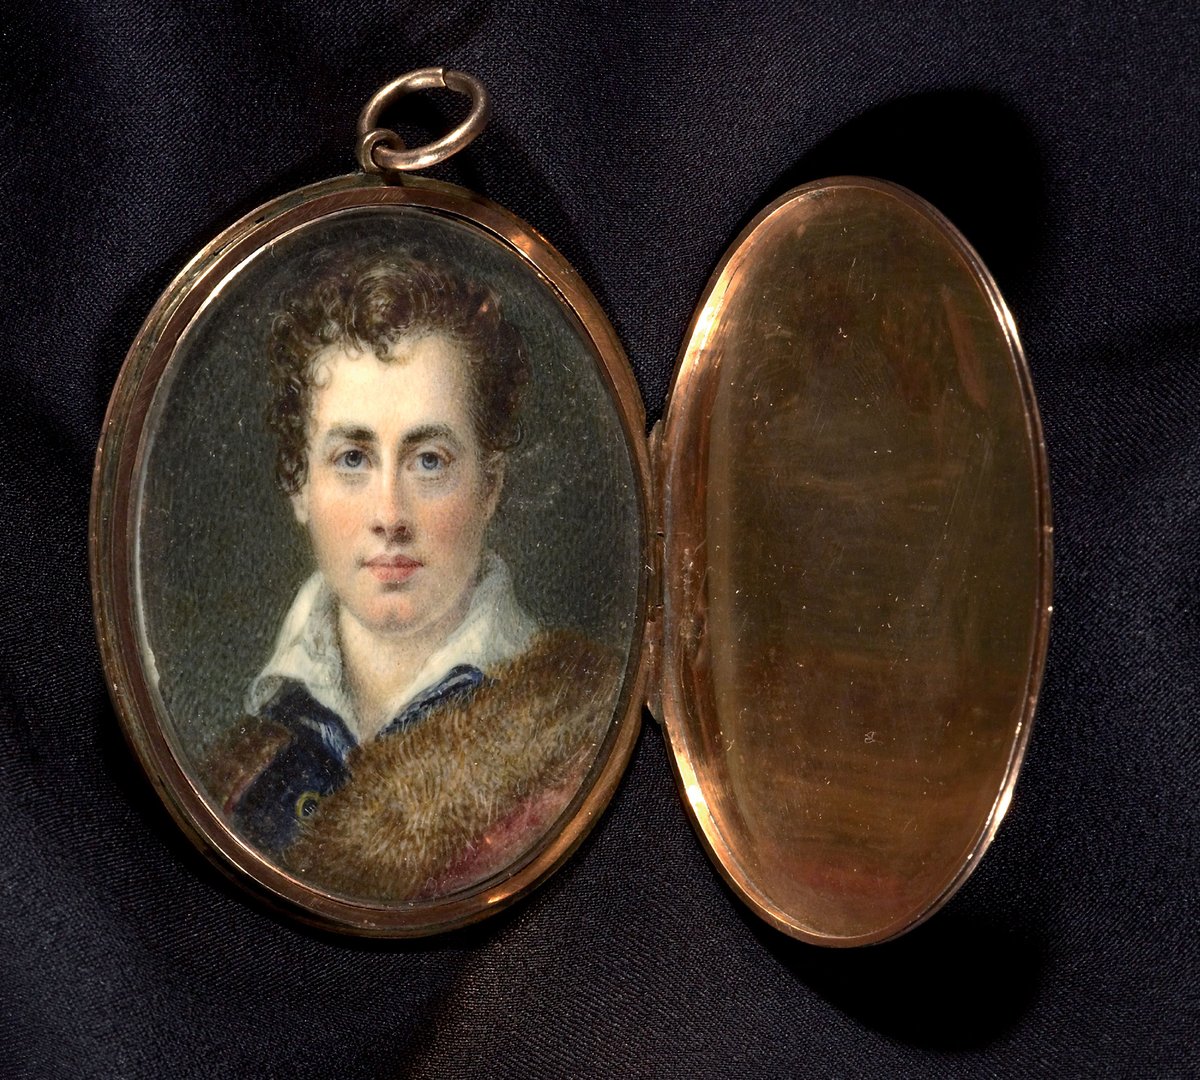 Today's picture: a miniature of Byron once owned by his lover Caroline Lamb. It's a copy of an image Byron believed was 'the best miniature of me” bodleianlibs.tumblr.com/post/169996266…